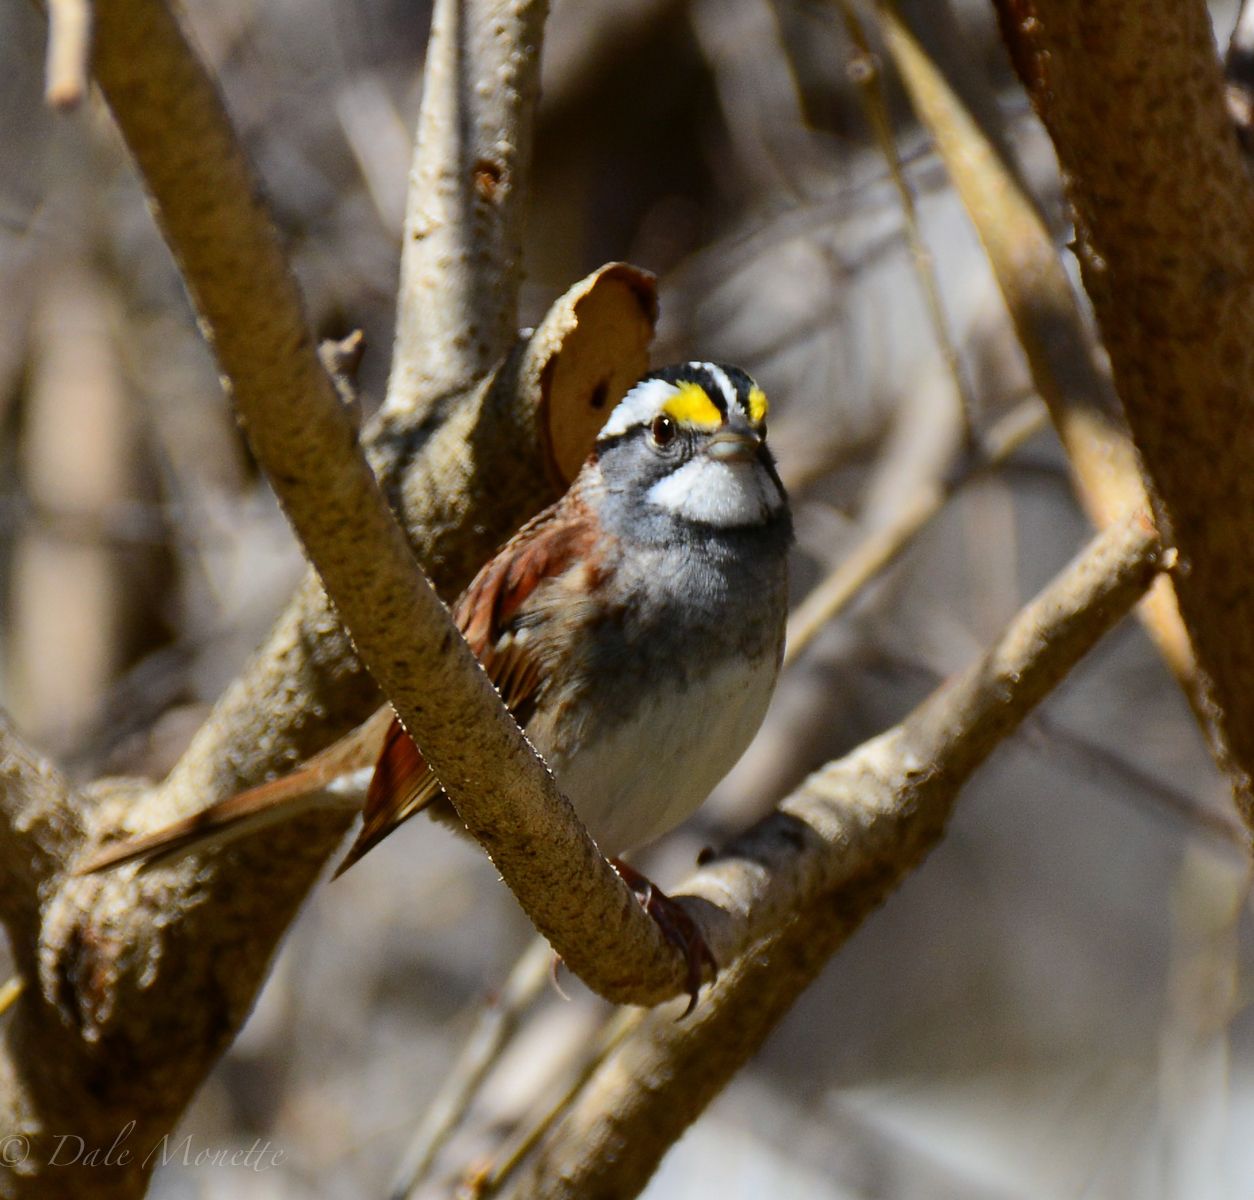 White throated sparrow….